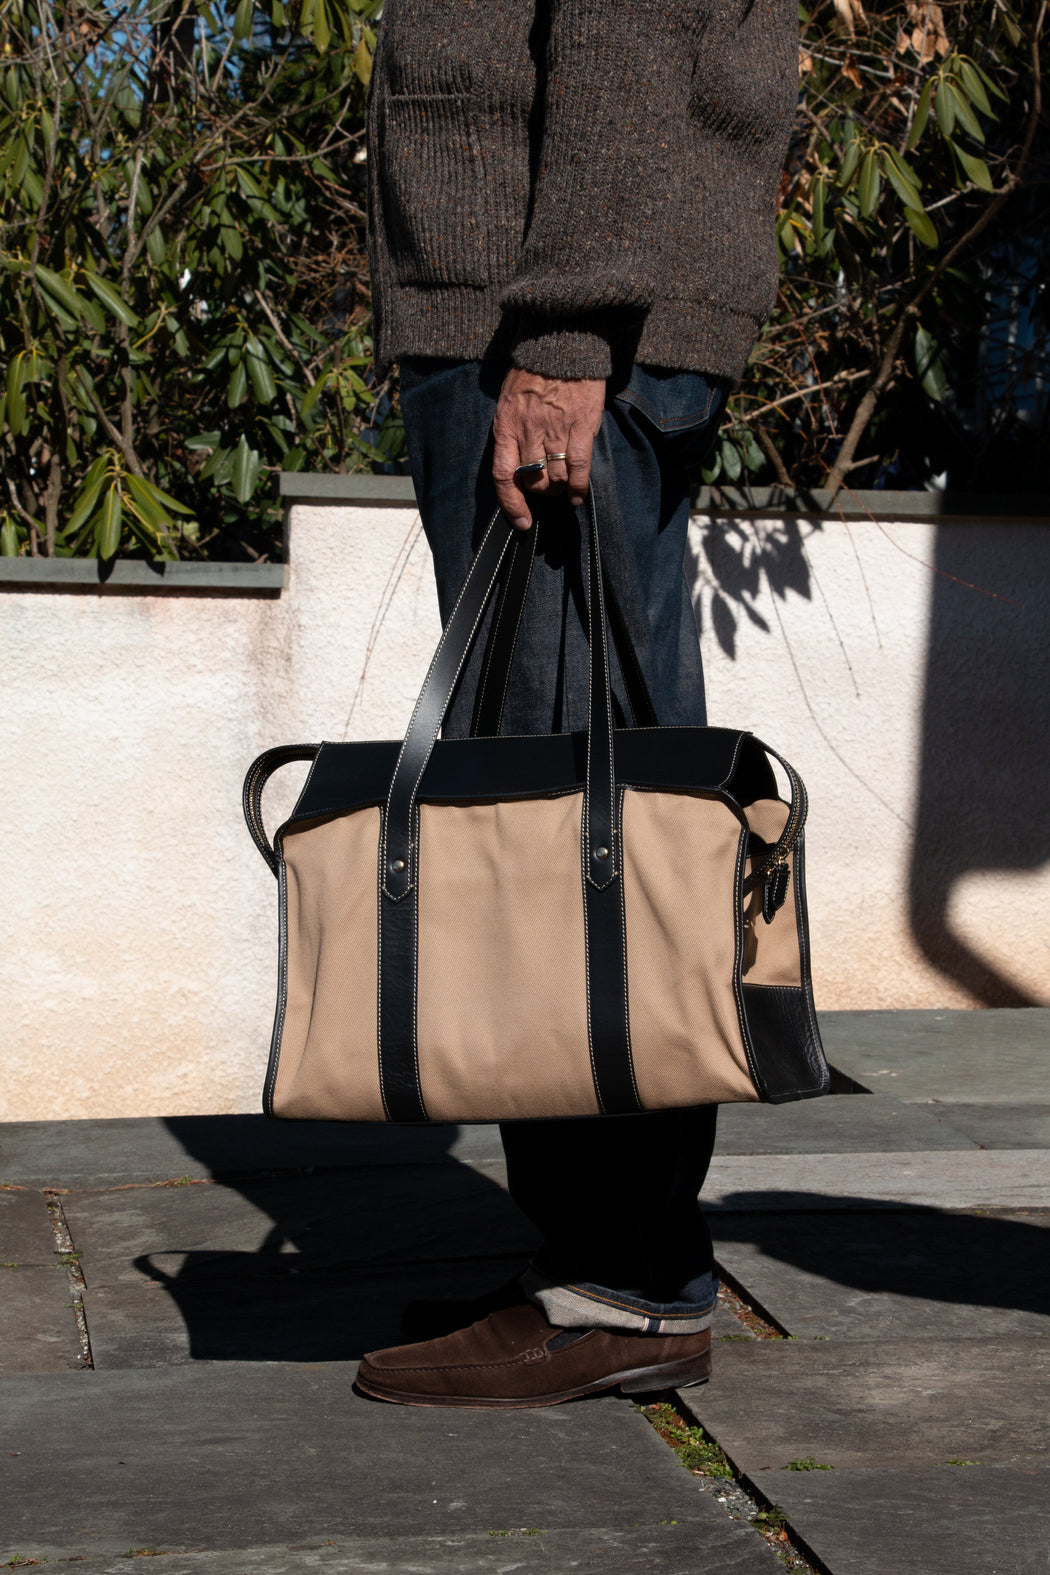 Model holding tan cotton twill weekender bag with leather handles